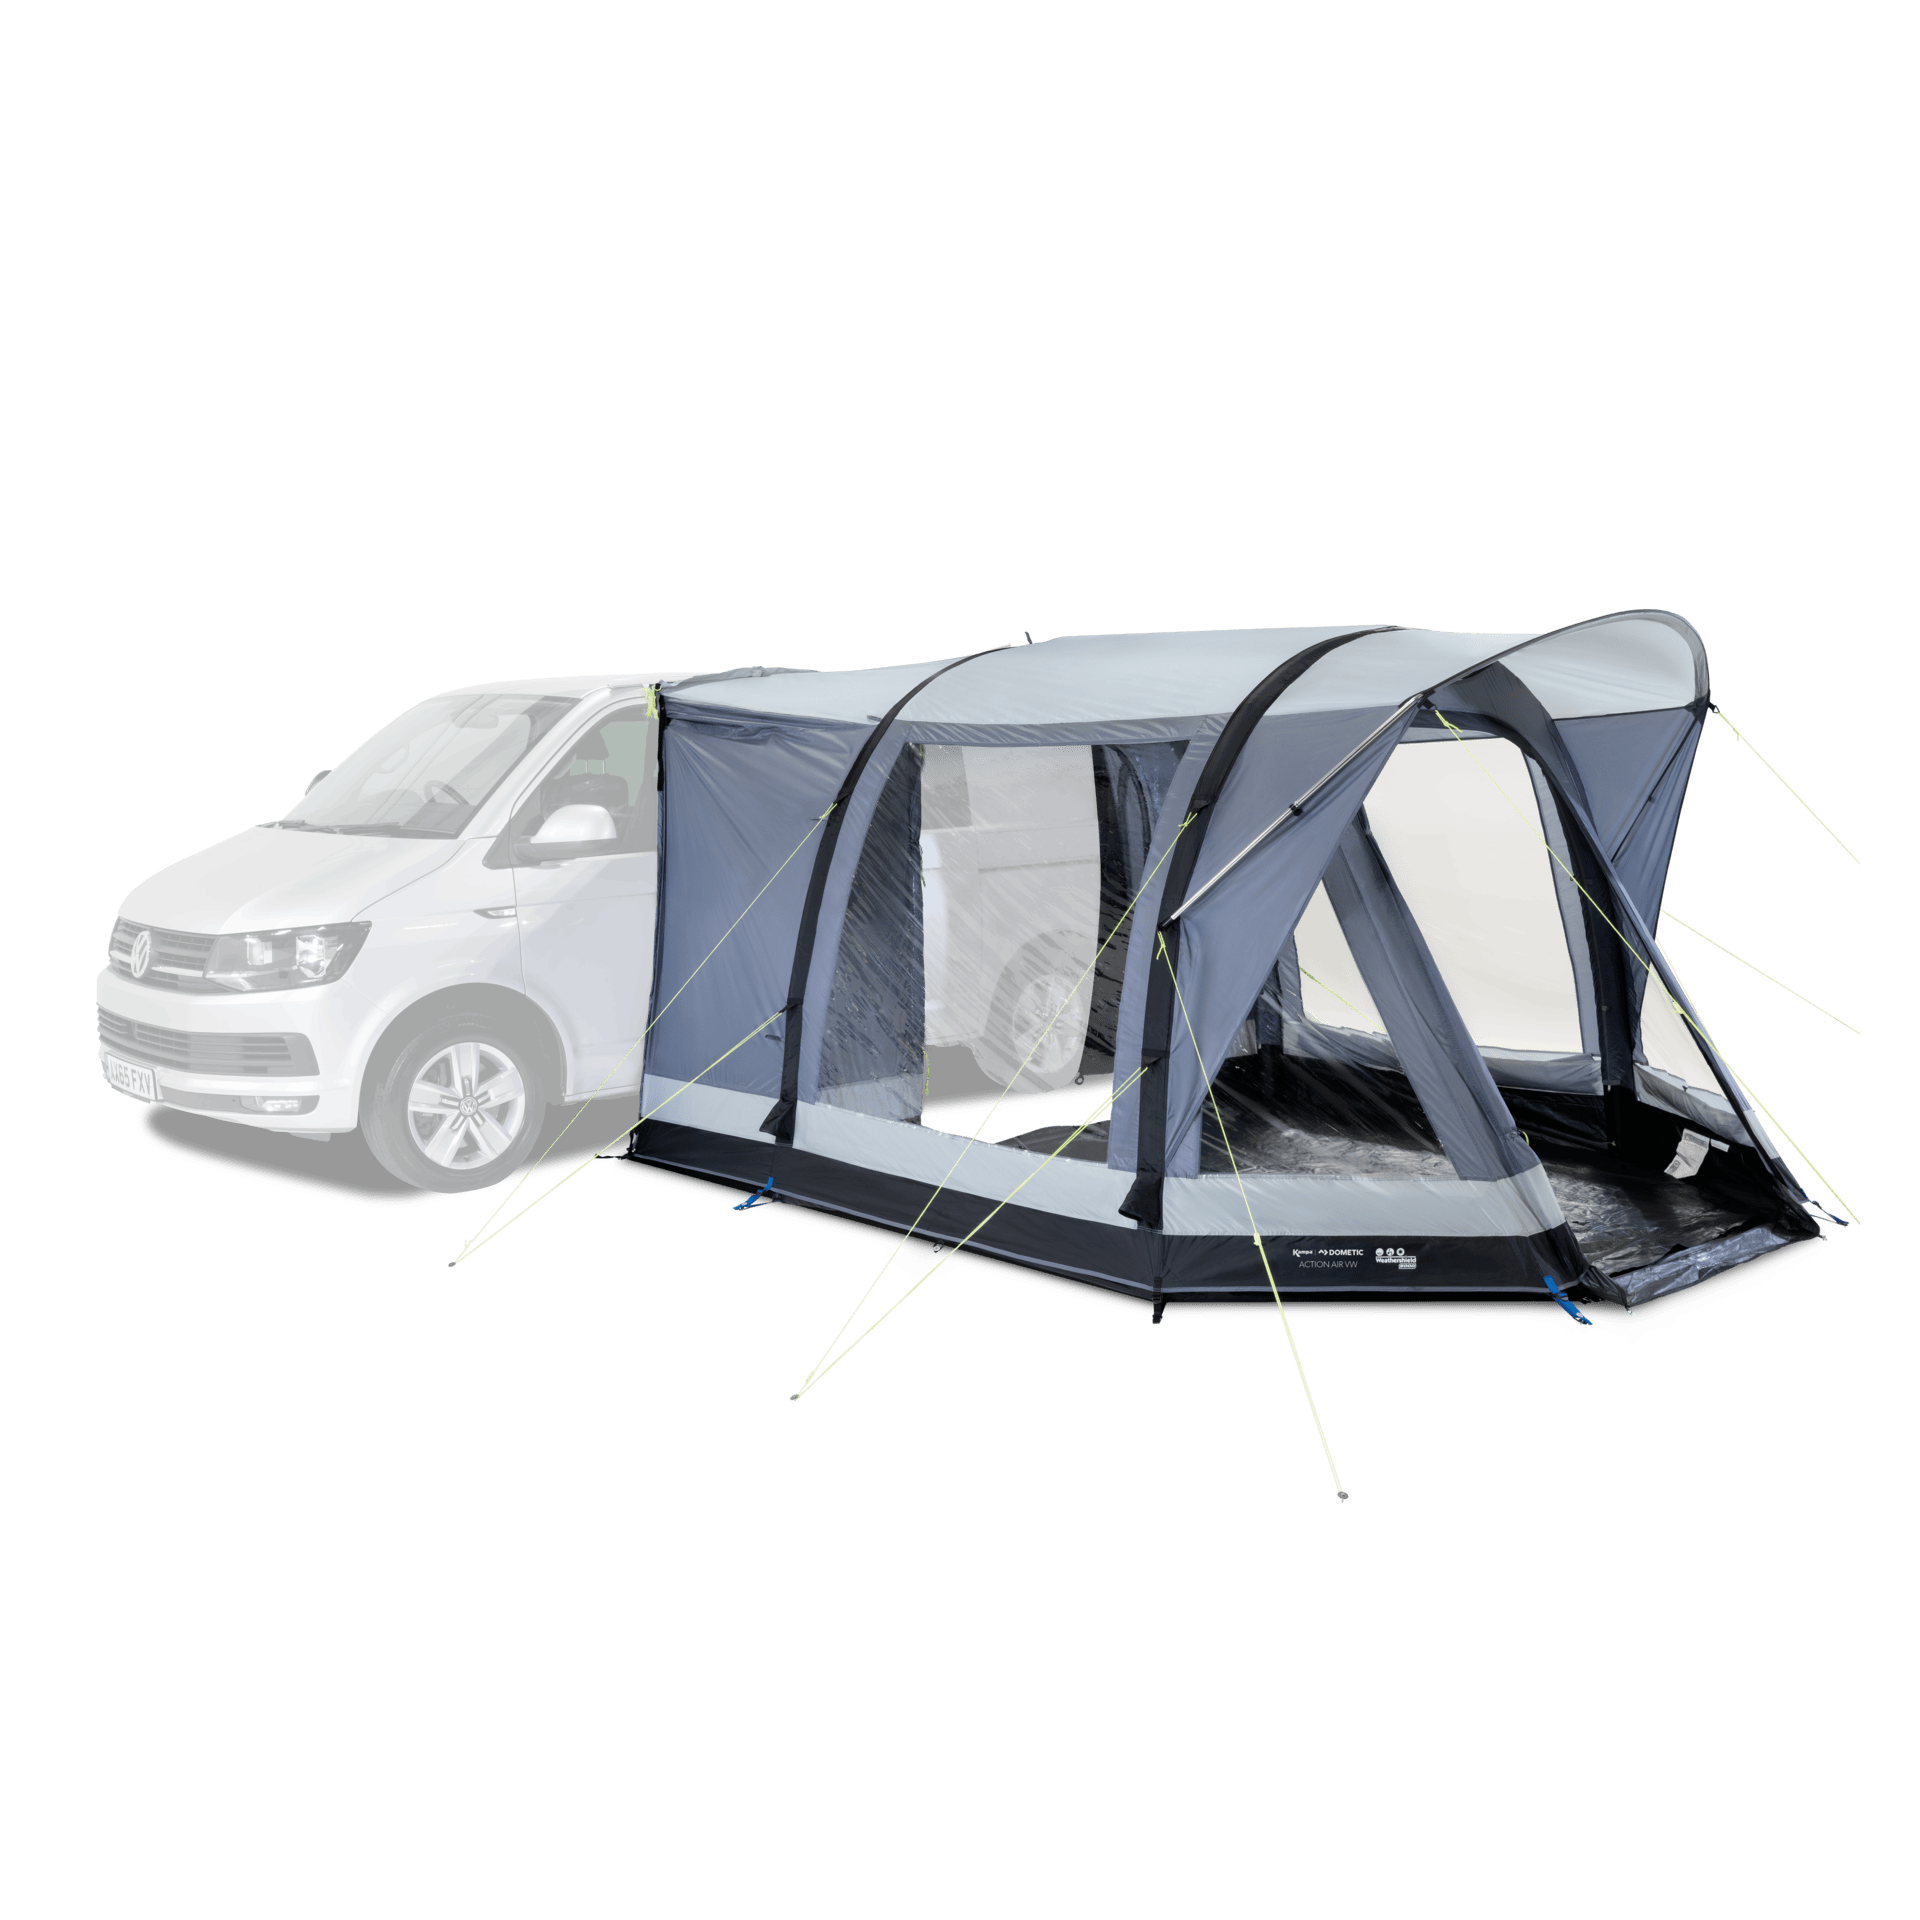 Kampa Dometic Double Action Luftpumpe, 2L bei Camping Wagner Campingzubehör